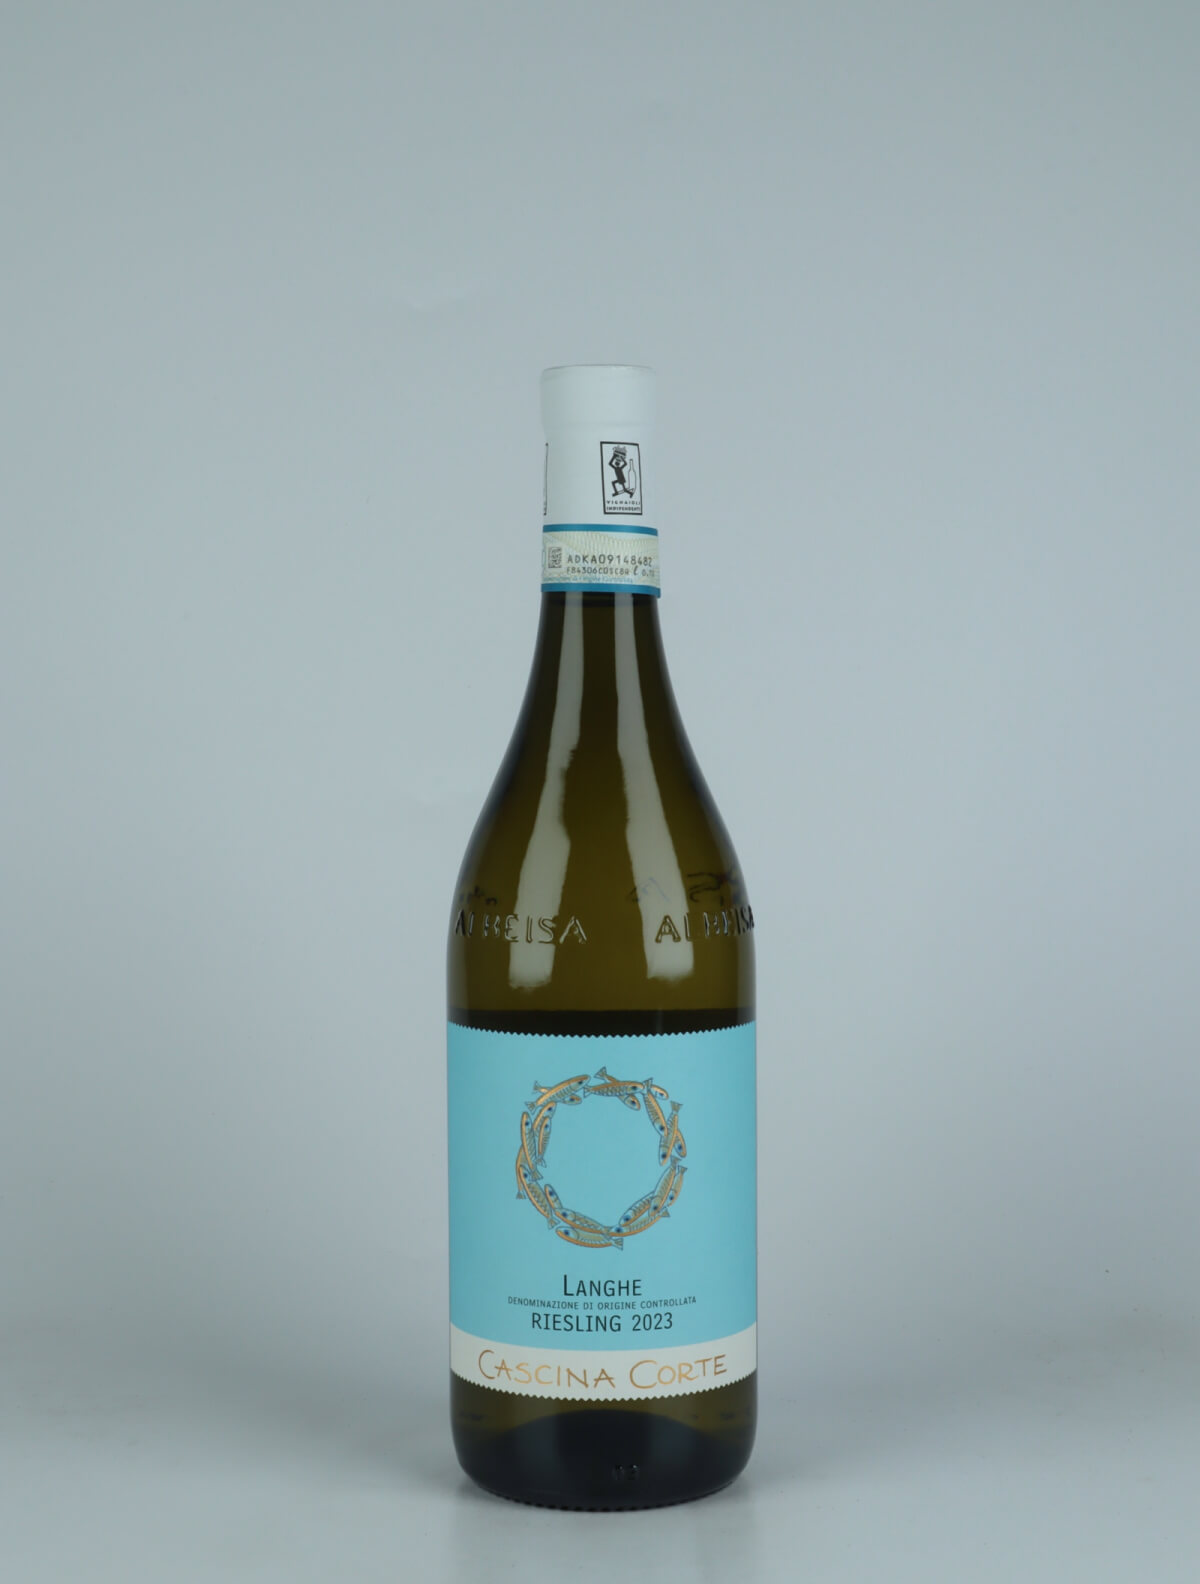 A bottle 2023 Langhe Riesling White wine from Cascina Corte, Piedmont in Italy